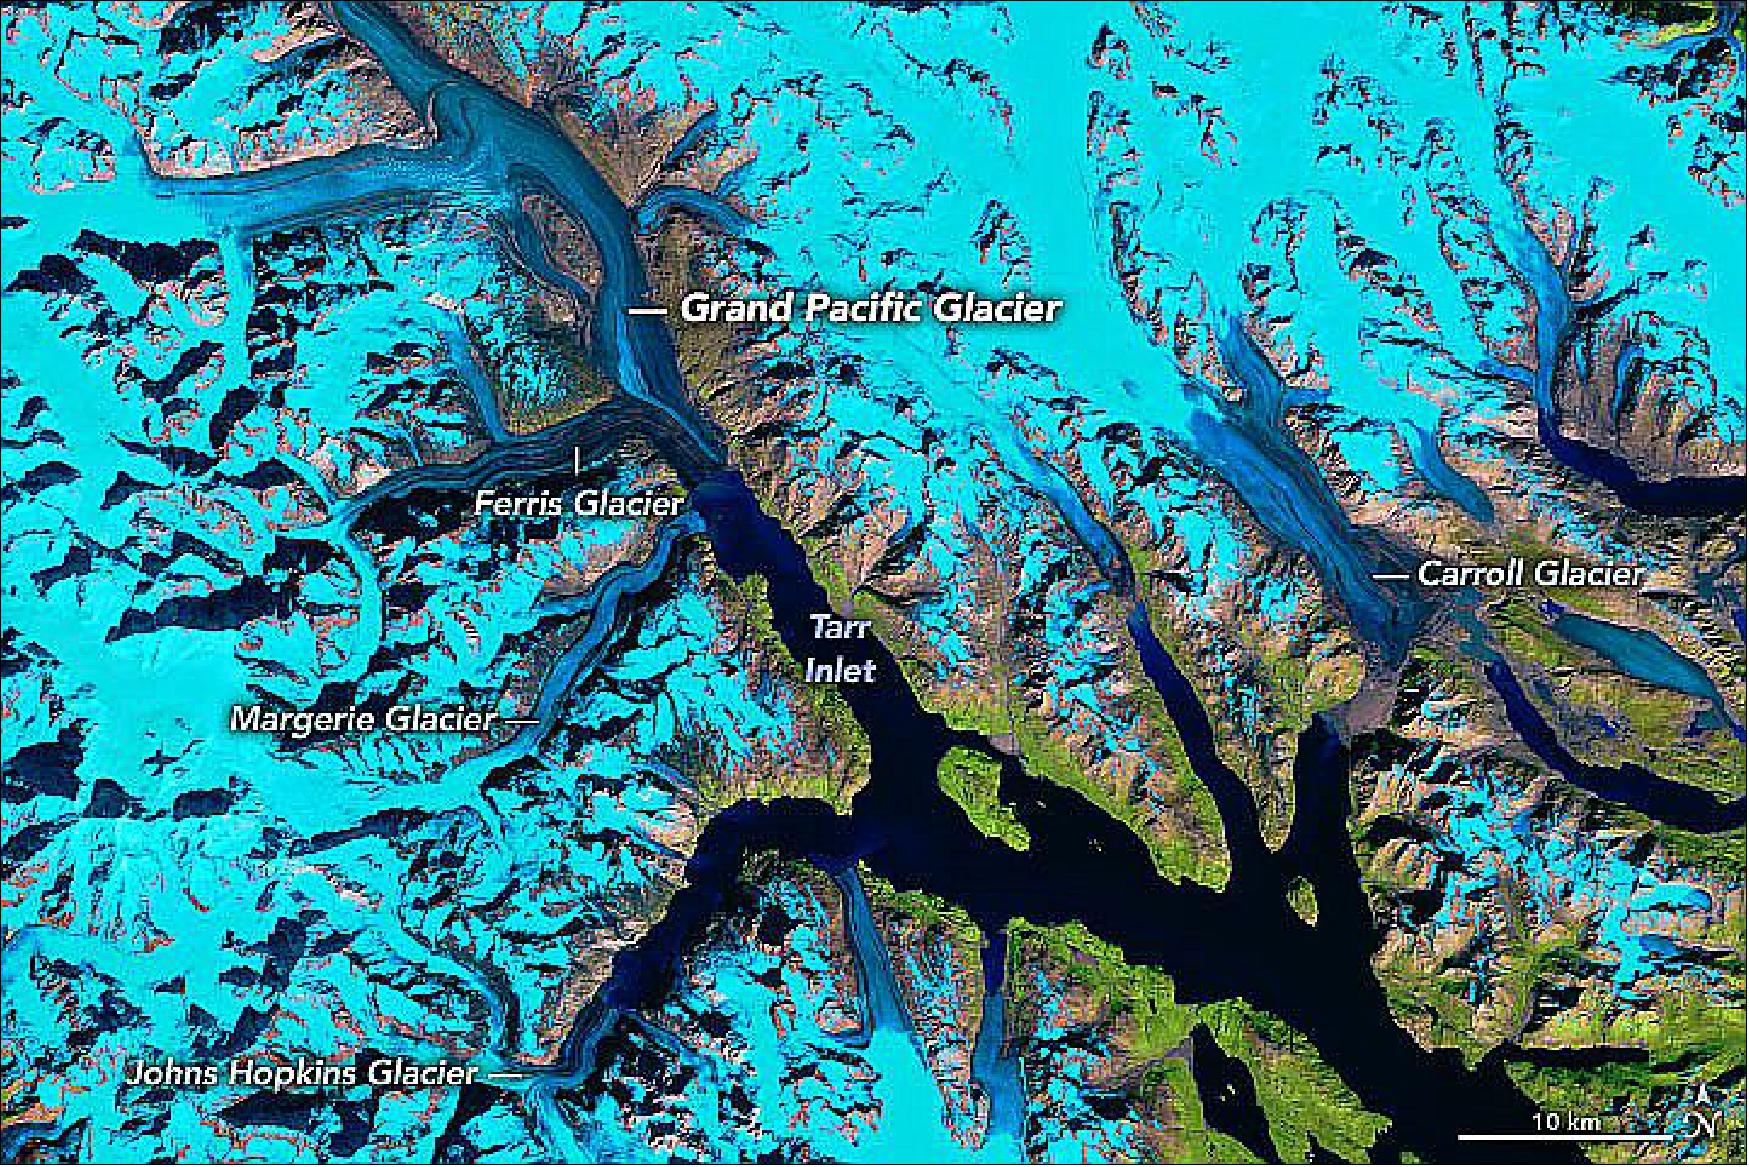 Figure 35: Landsat-5 image of the west arm of Glacier Bay acquired with TM (Thematic Mapper) on 5 September 1986 (image credit: NASA Earth Observatory, images by Joshua Stevens, using Landsat data from the U.S. Geological Survey, topographic data from the Shuttle Radar Topography Mission (SRTM), and land cover data from the Multi-Resolution Land Characteristics (MRLC) Consortium. Story by Kathryn Hansen, inspired by Landsat images prepared by Christopher Shuman (UMBC) for the Earth to Sky partnership between NASA and the National Park Service)